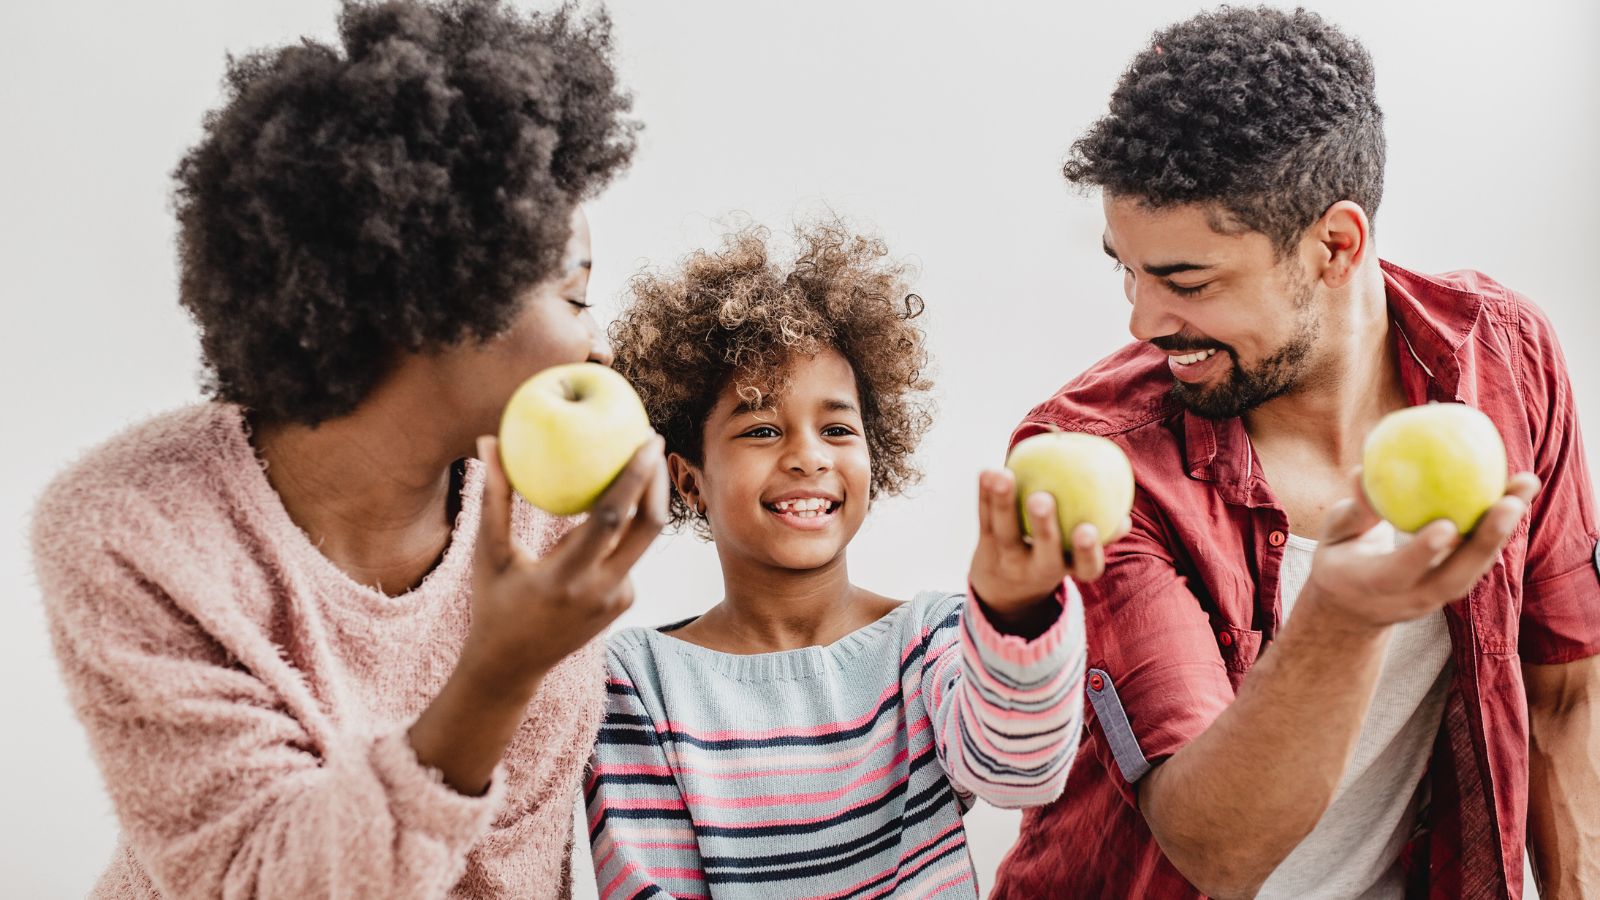 Mom, Dad and Kid holding an apple